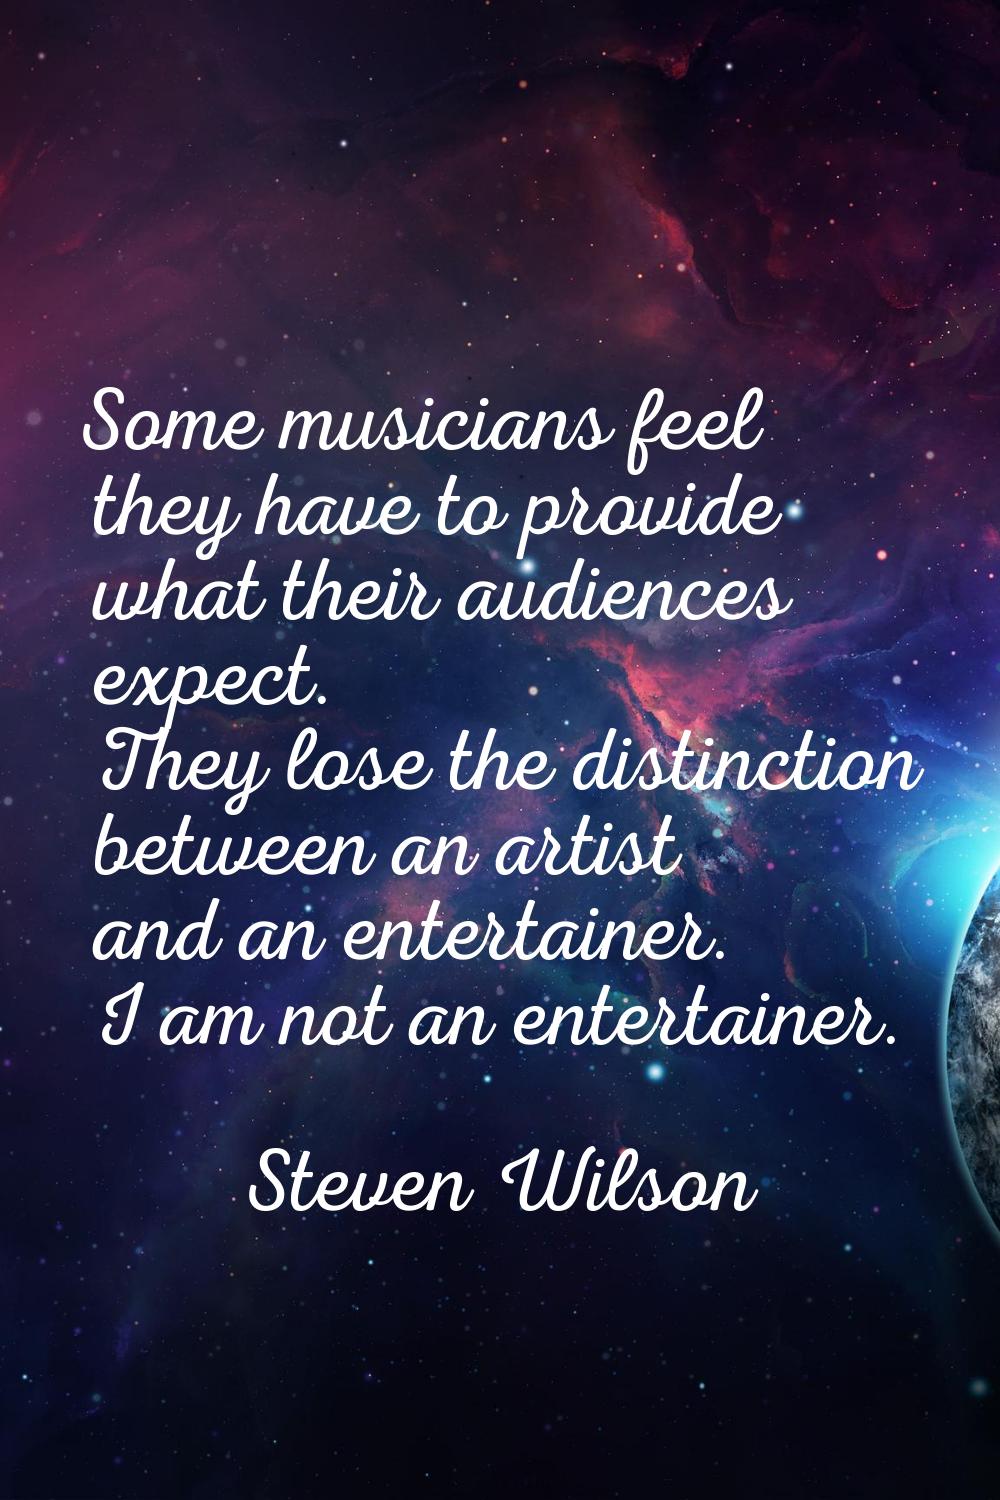 Some musicians feel they have to provide what their audiences expect. They lose the distinction bet